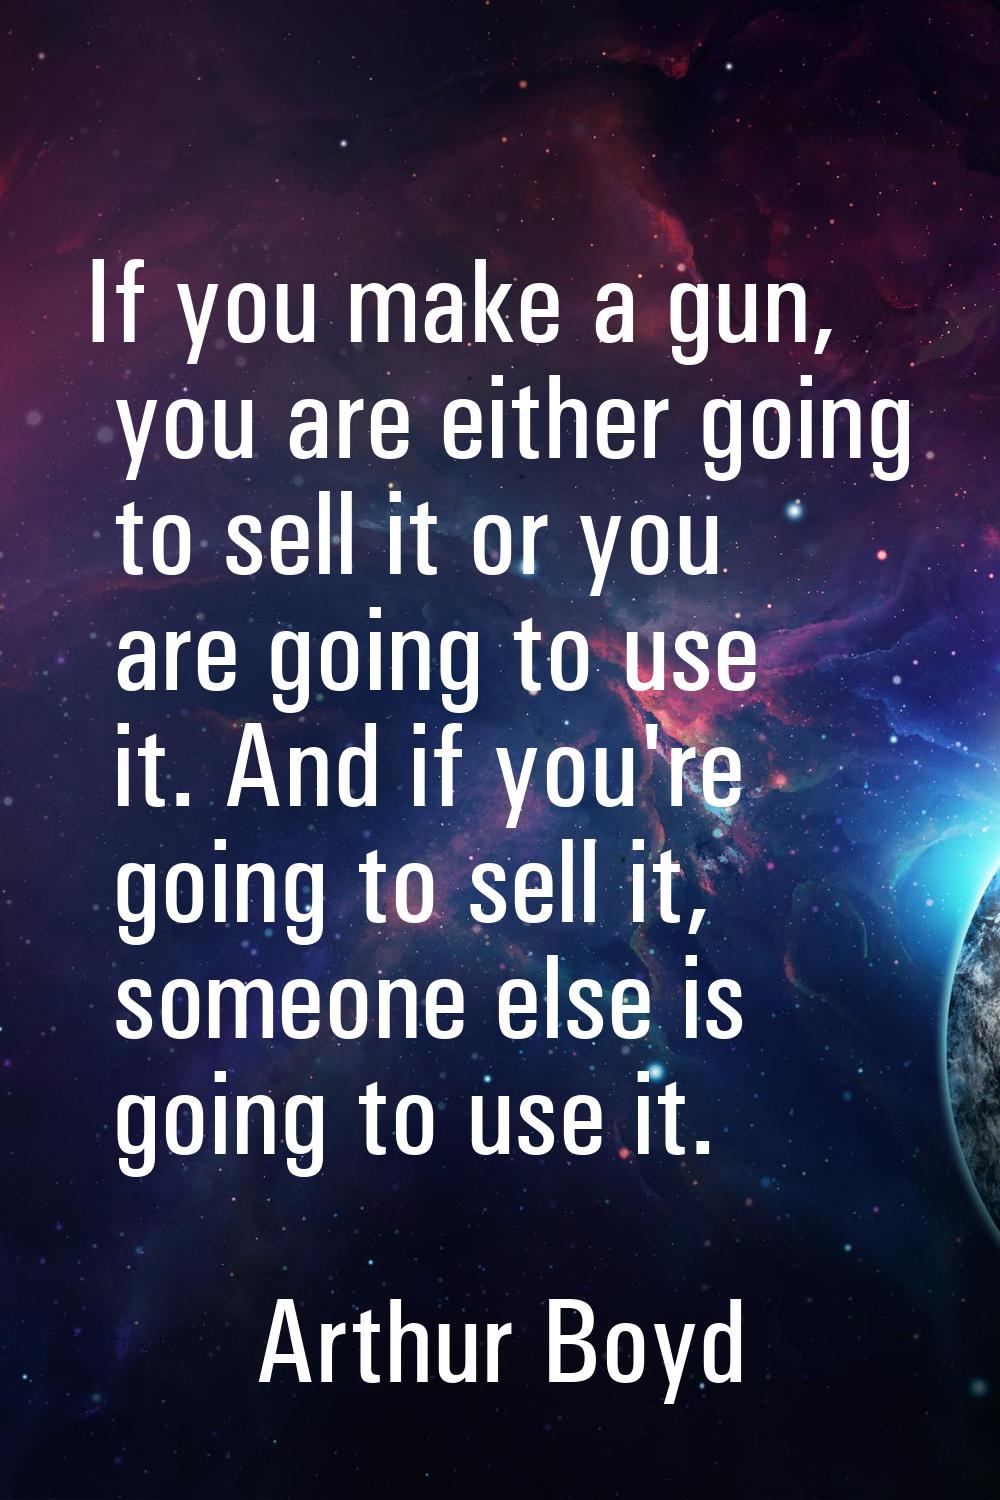 If you make a gun, you are either going to sell it or you are going to use it. And if you're going 